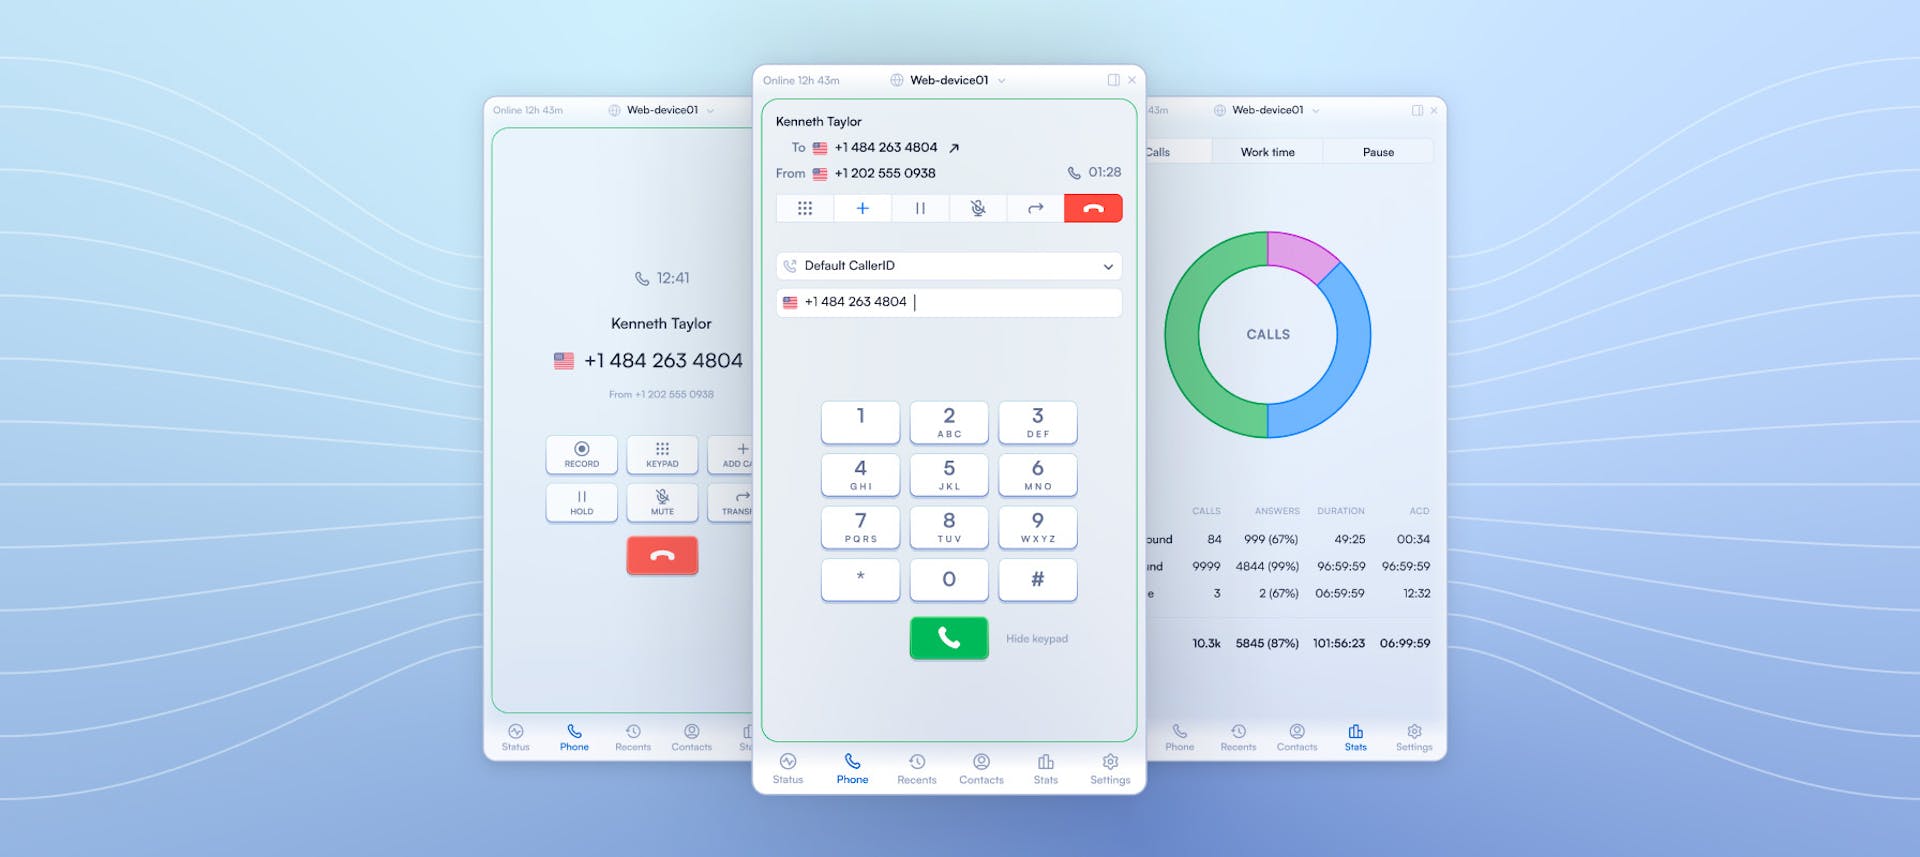 Different screens of the PBX softphone app User Interface